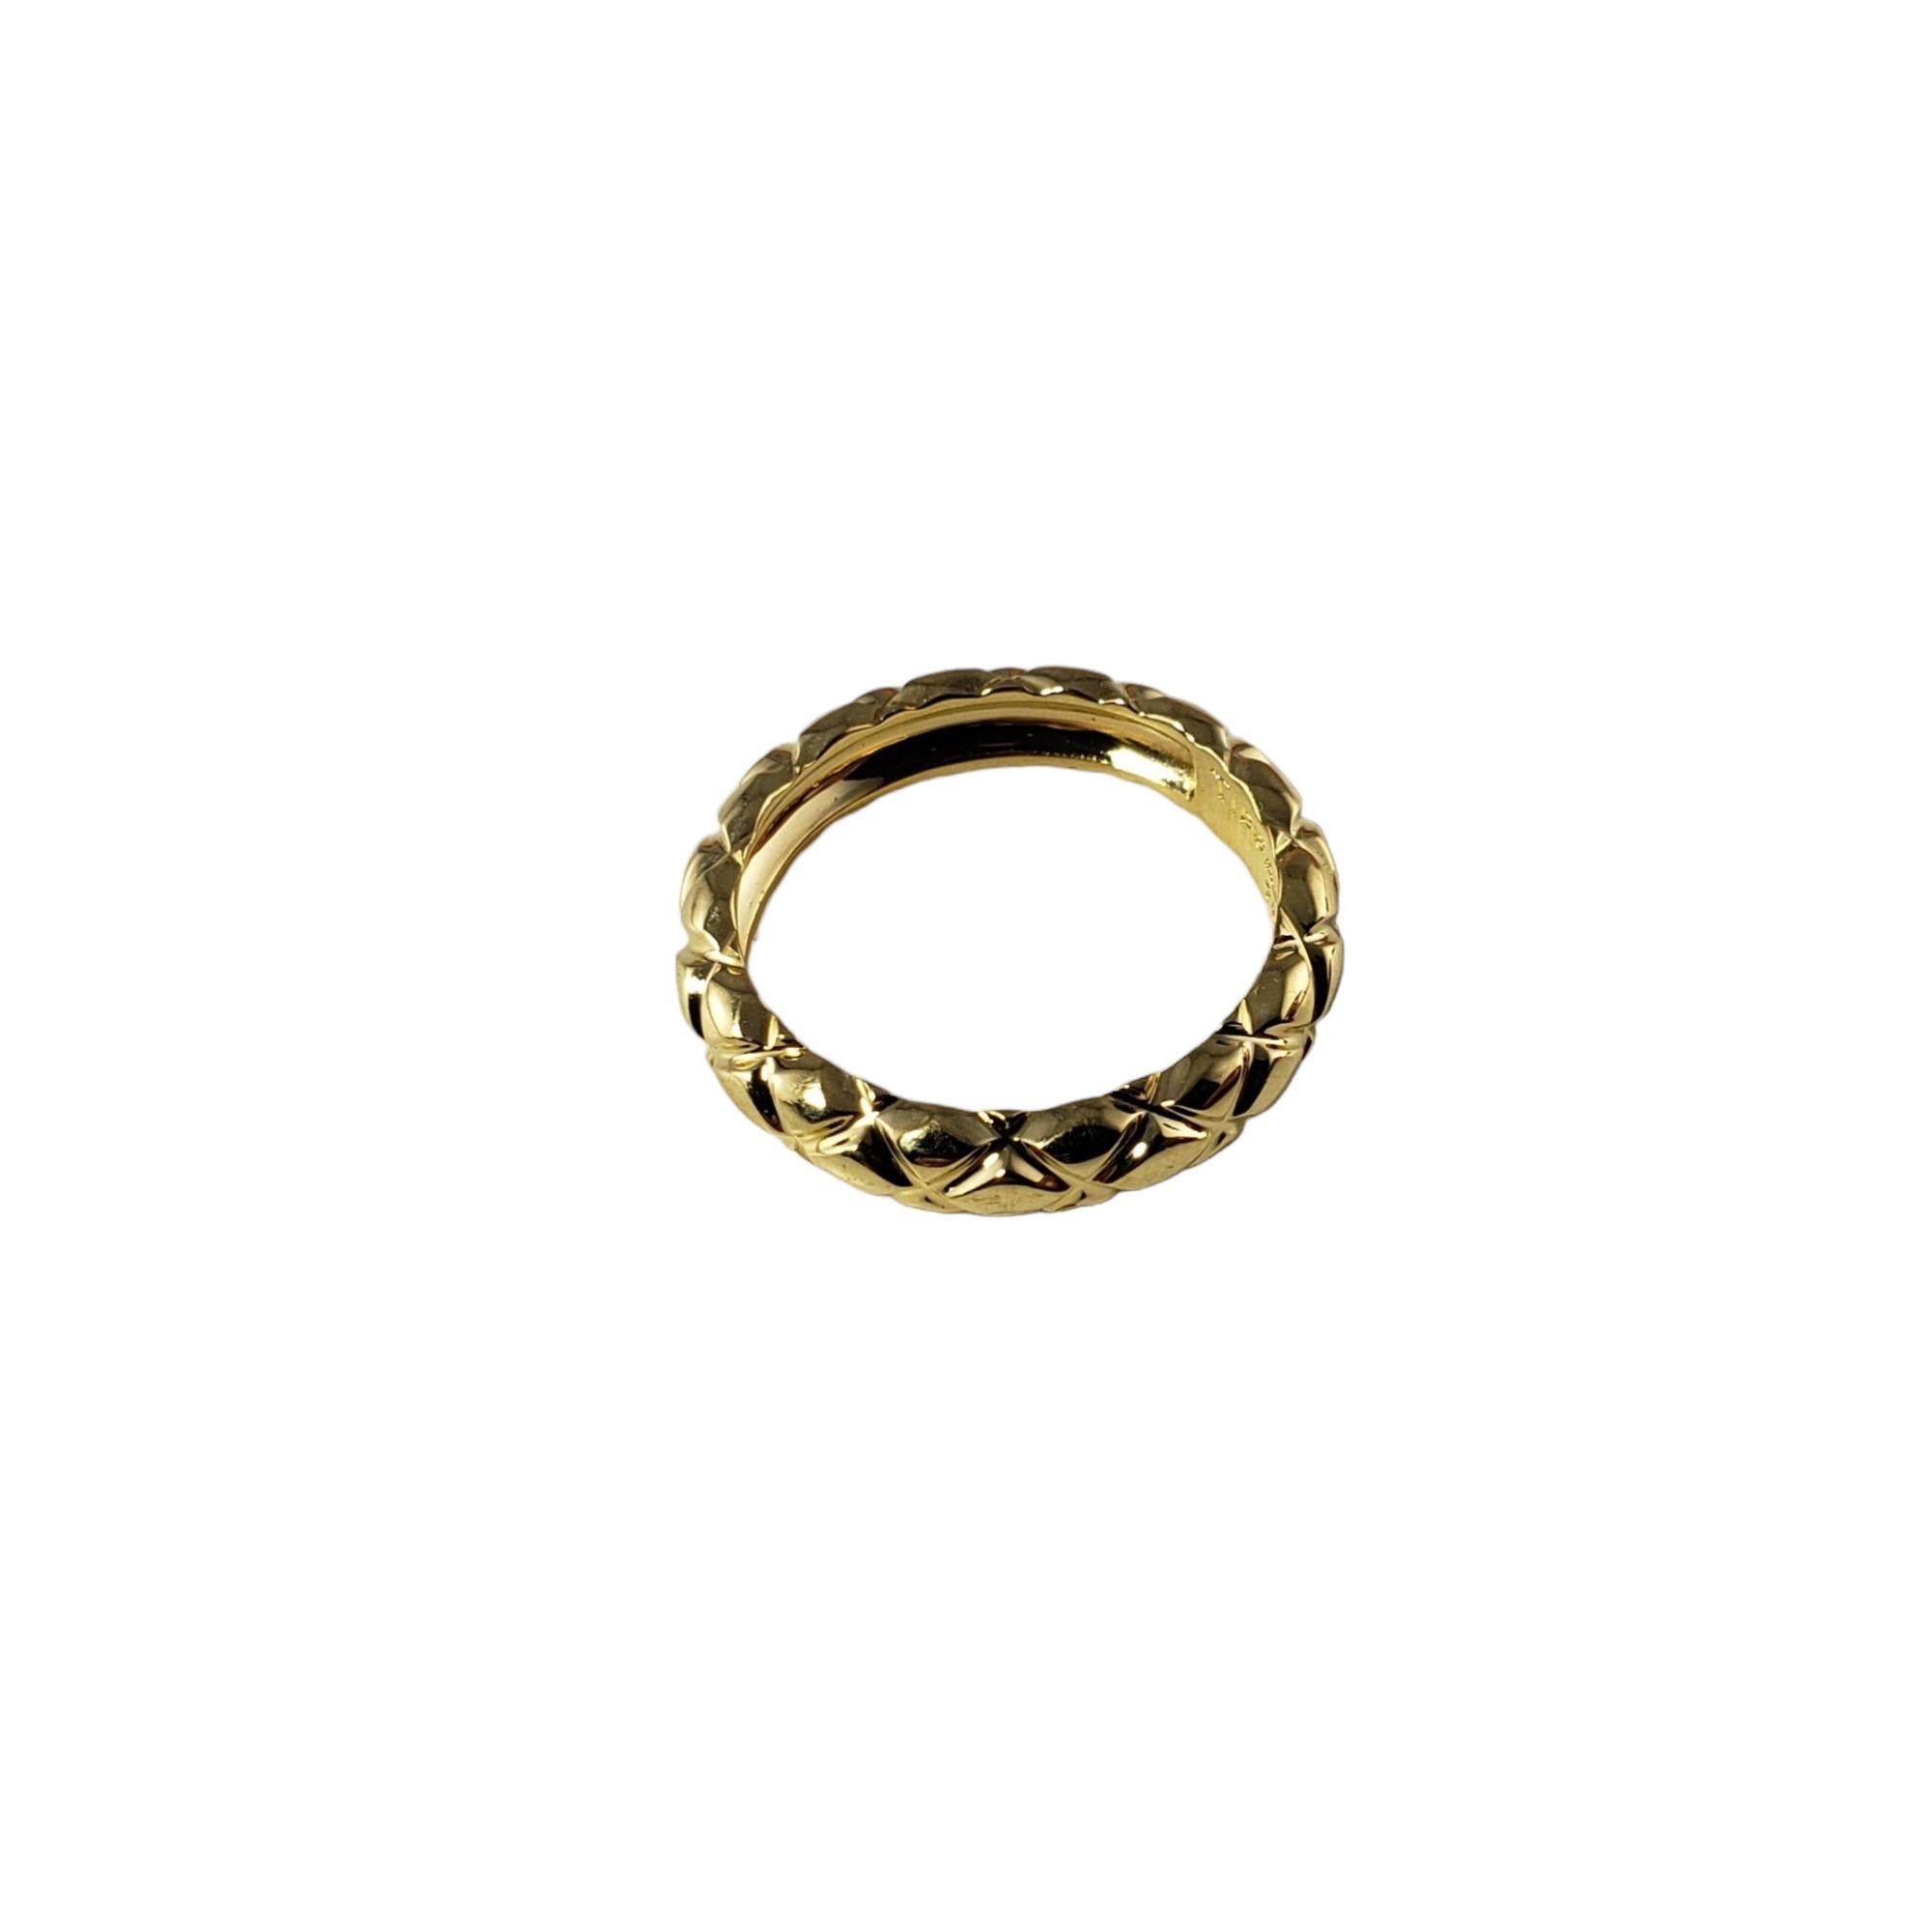 Vintage Tiffany & Co. 18 Karat Yellow Gold Wedding Band Size 6-

This elegant band by Tiffany & Co. is crafted in meticulously detailed 18K yellow gold. Width: 4 mm.

Ring Size: 6

Weight: 4.3 gr./ 2.7 dwt.

Hallmark: TIFFANY & CO. 750

Very good